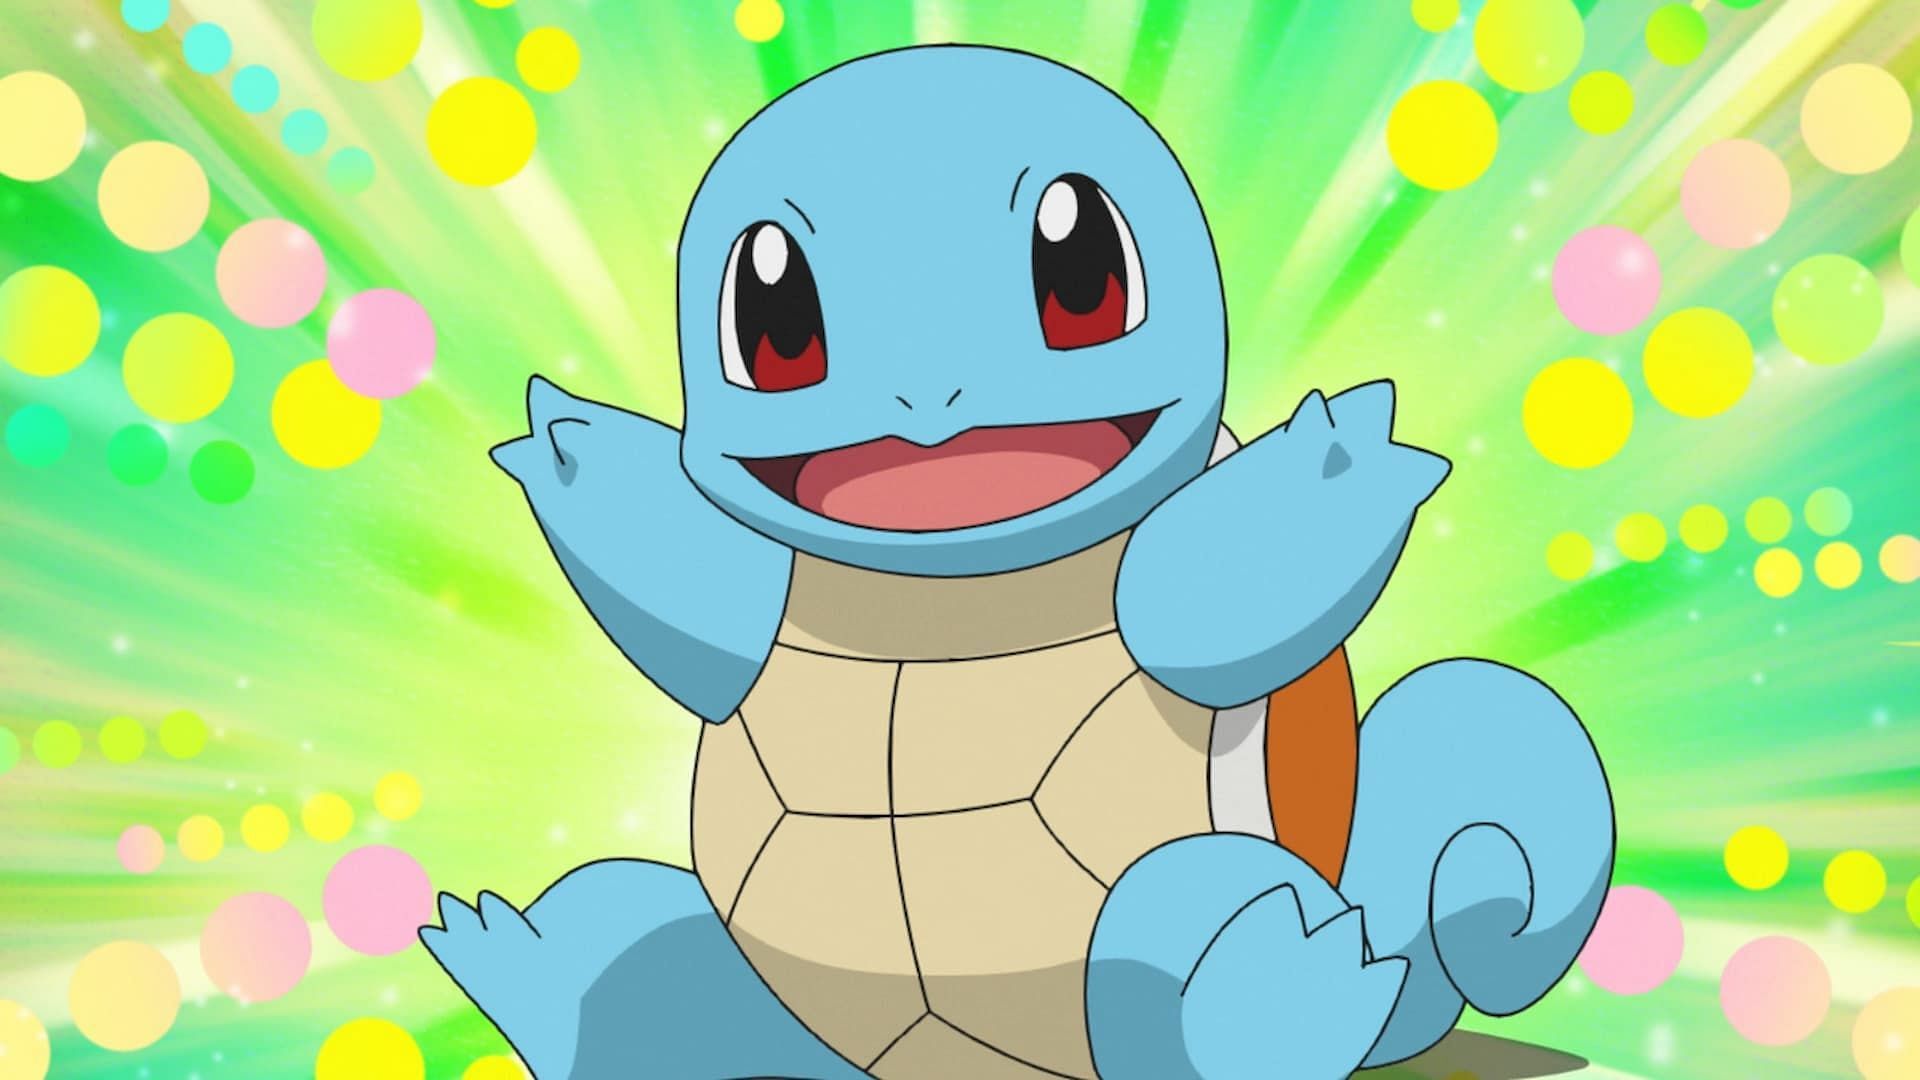 Squirtle in the Pokemon anime series (Image via TPC)